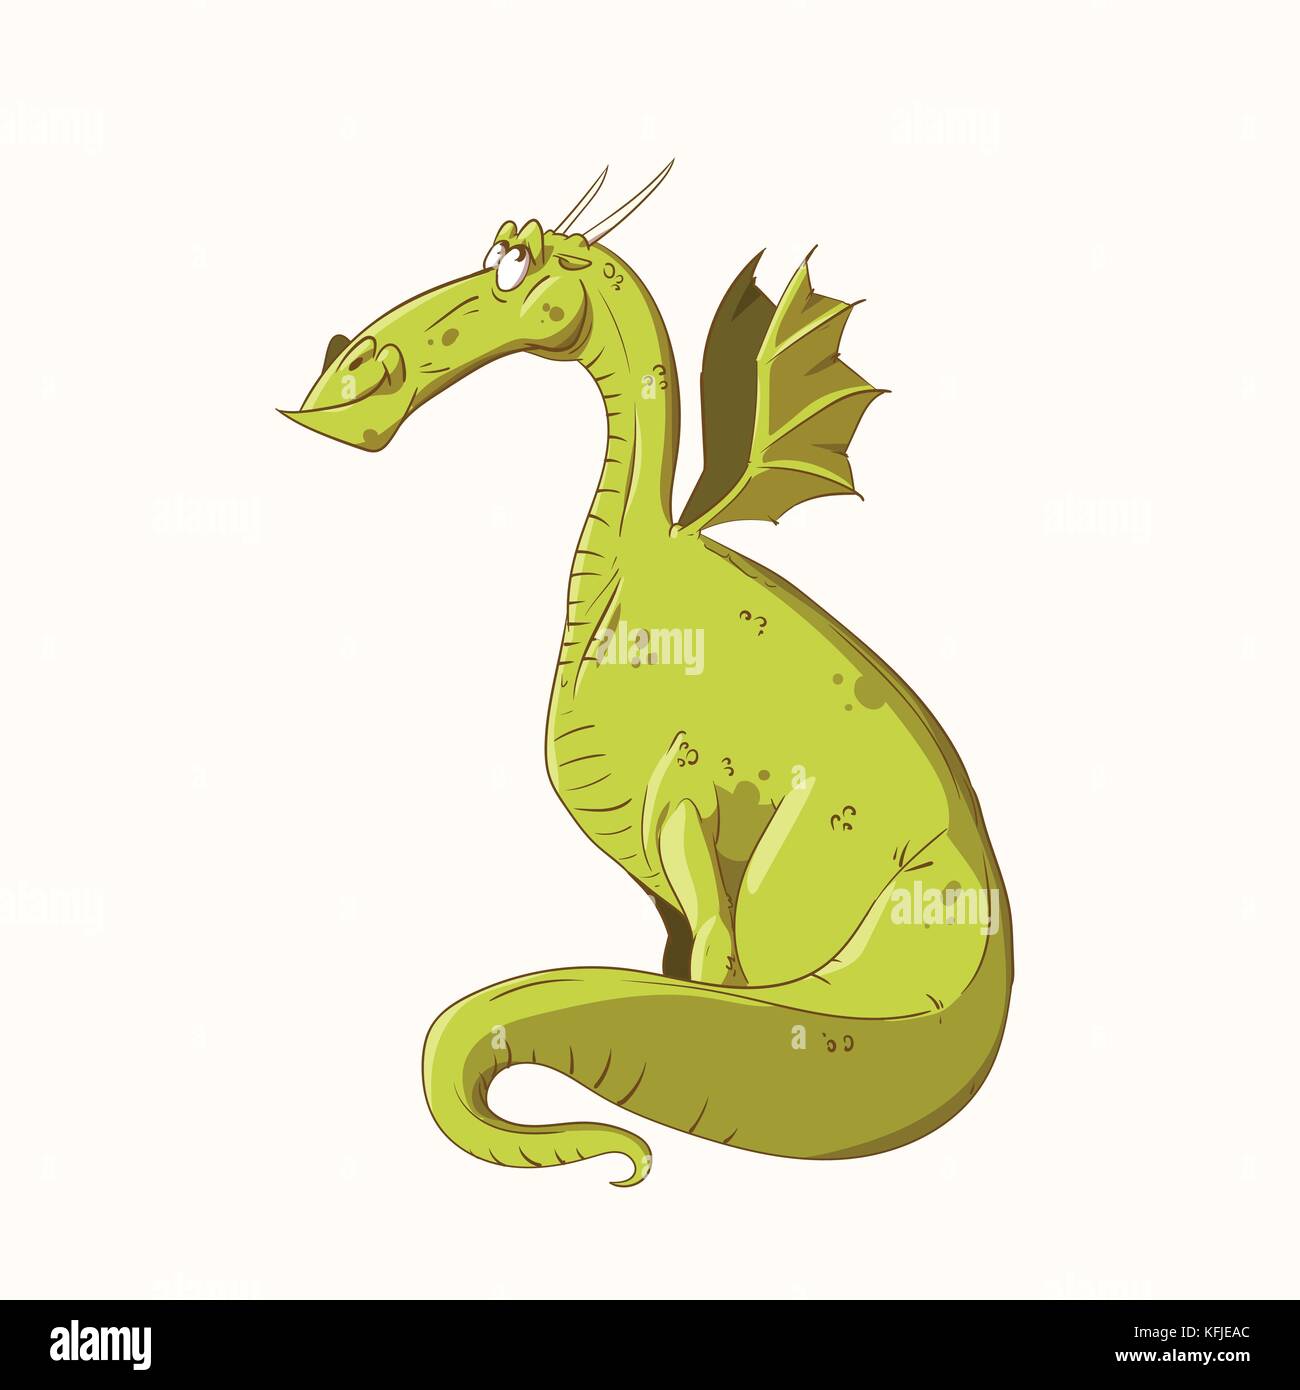 Colorful vector illustration of a cartoon green dragon, happy and smiling. Stock Vector